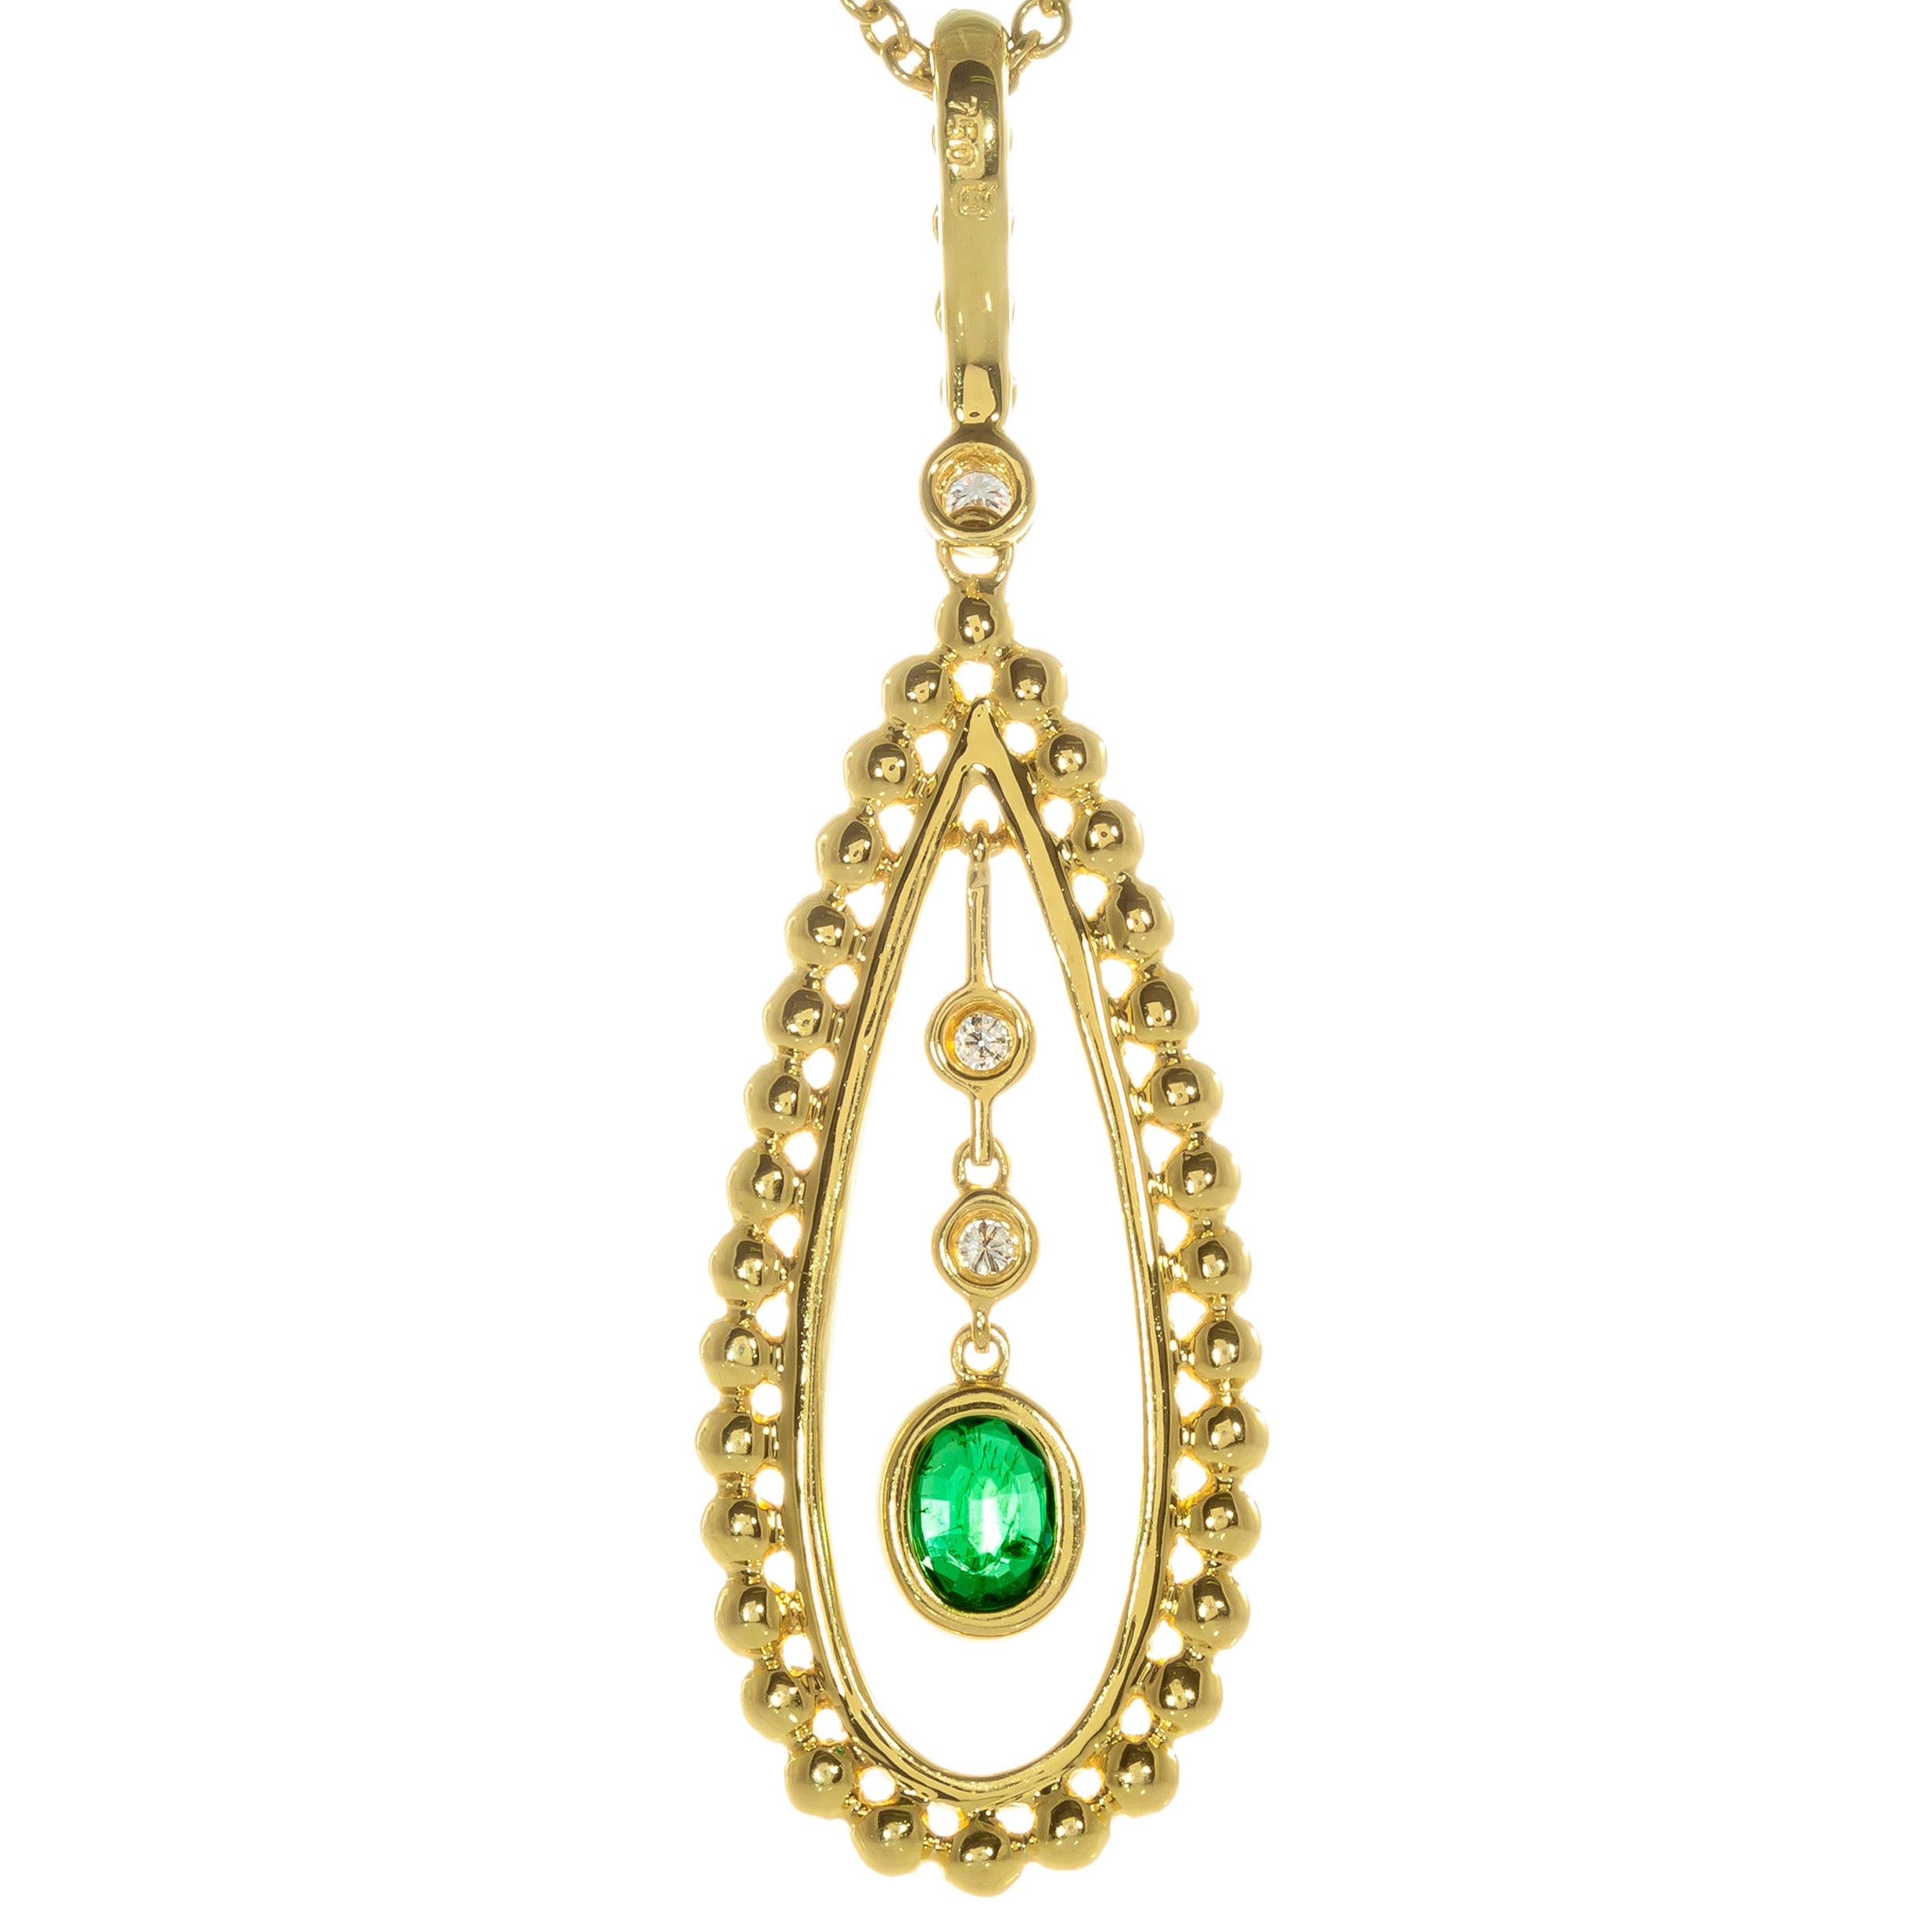 Oval bright green emerald and diamond pendant. 18k yellow gold pendant with one center emerald and three round accent diamonds. Handmade in the Peter Suchy workshop. GIA certified natural emerald. minor clarity enhancement only. 
 
3 round diamonds